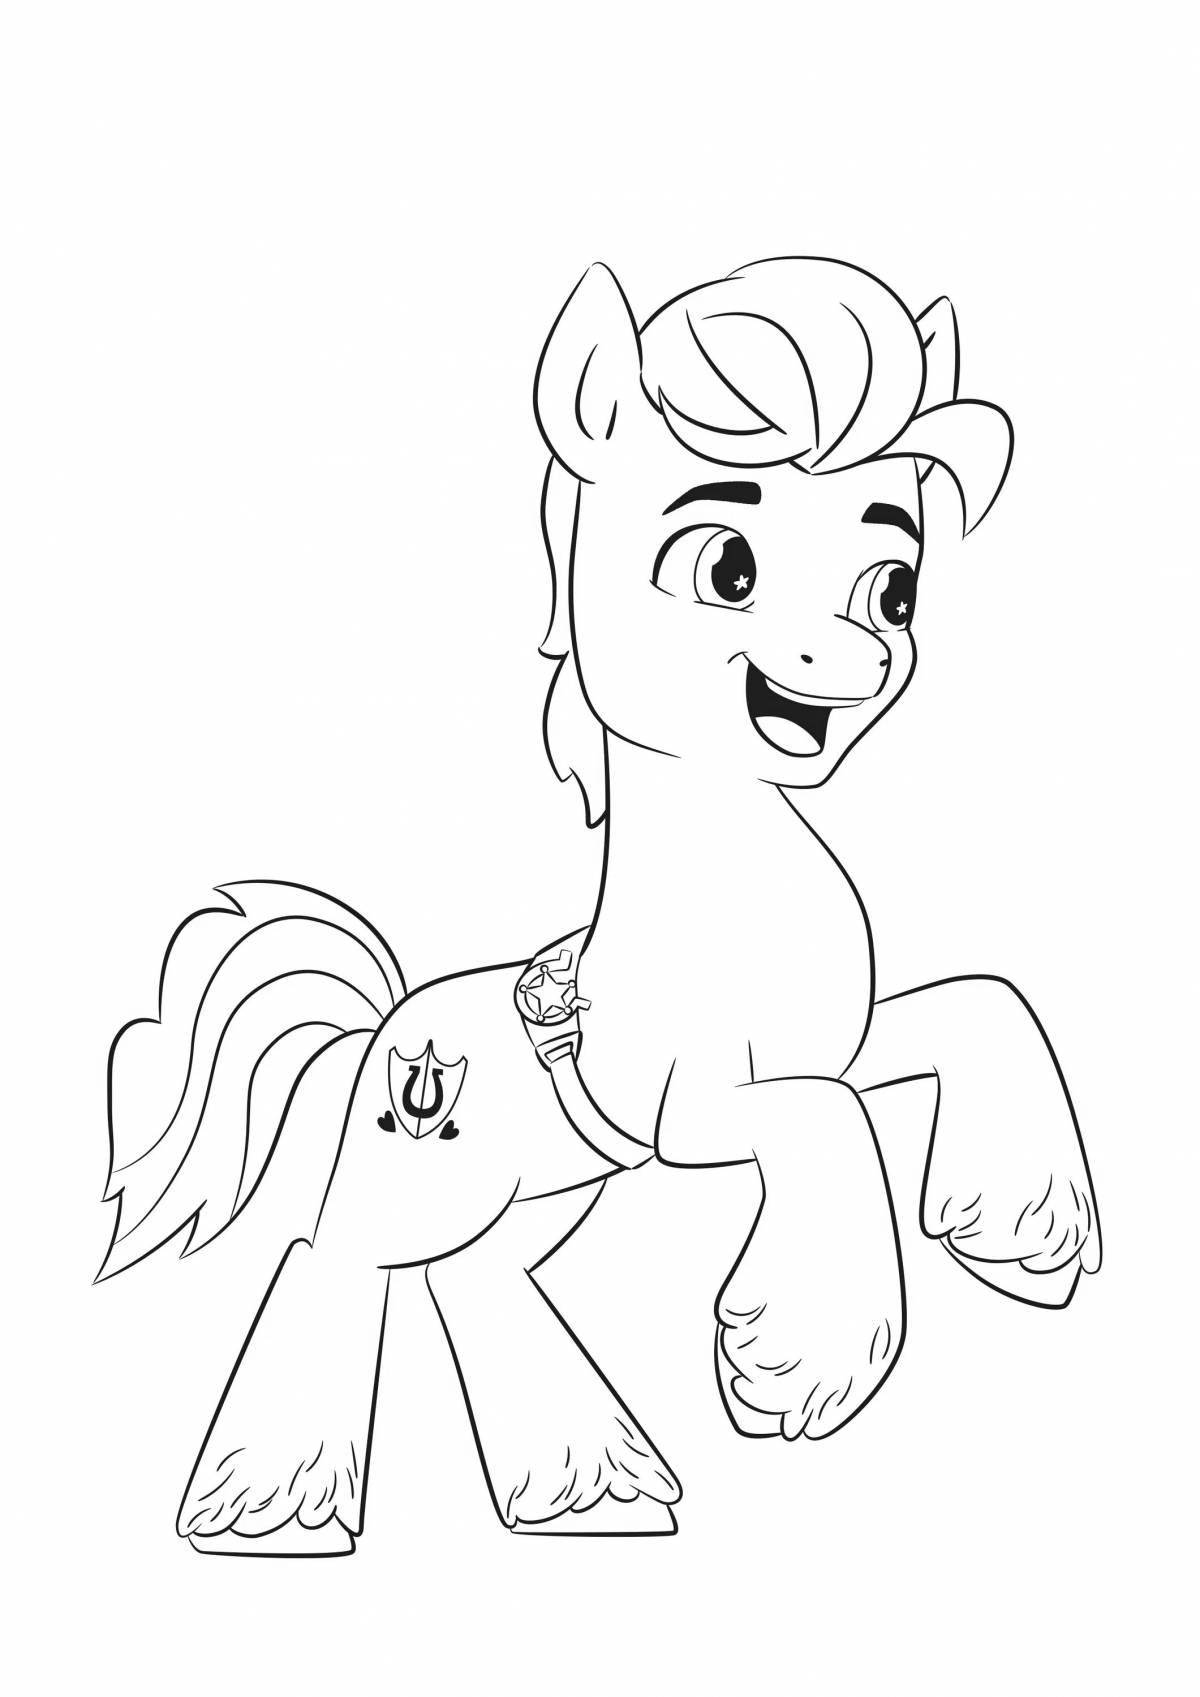 Shiny pony sleigh coloring page